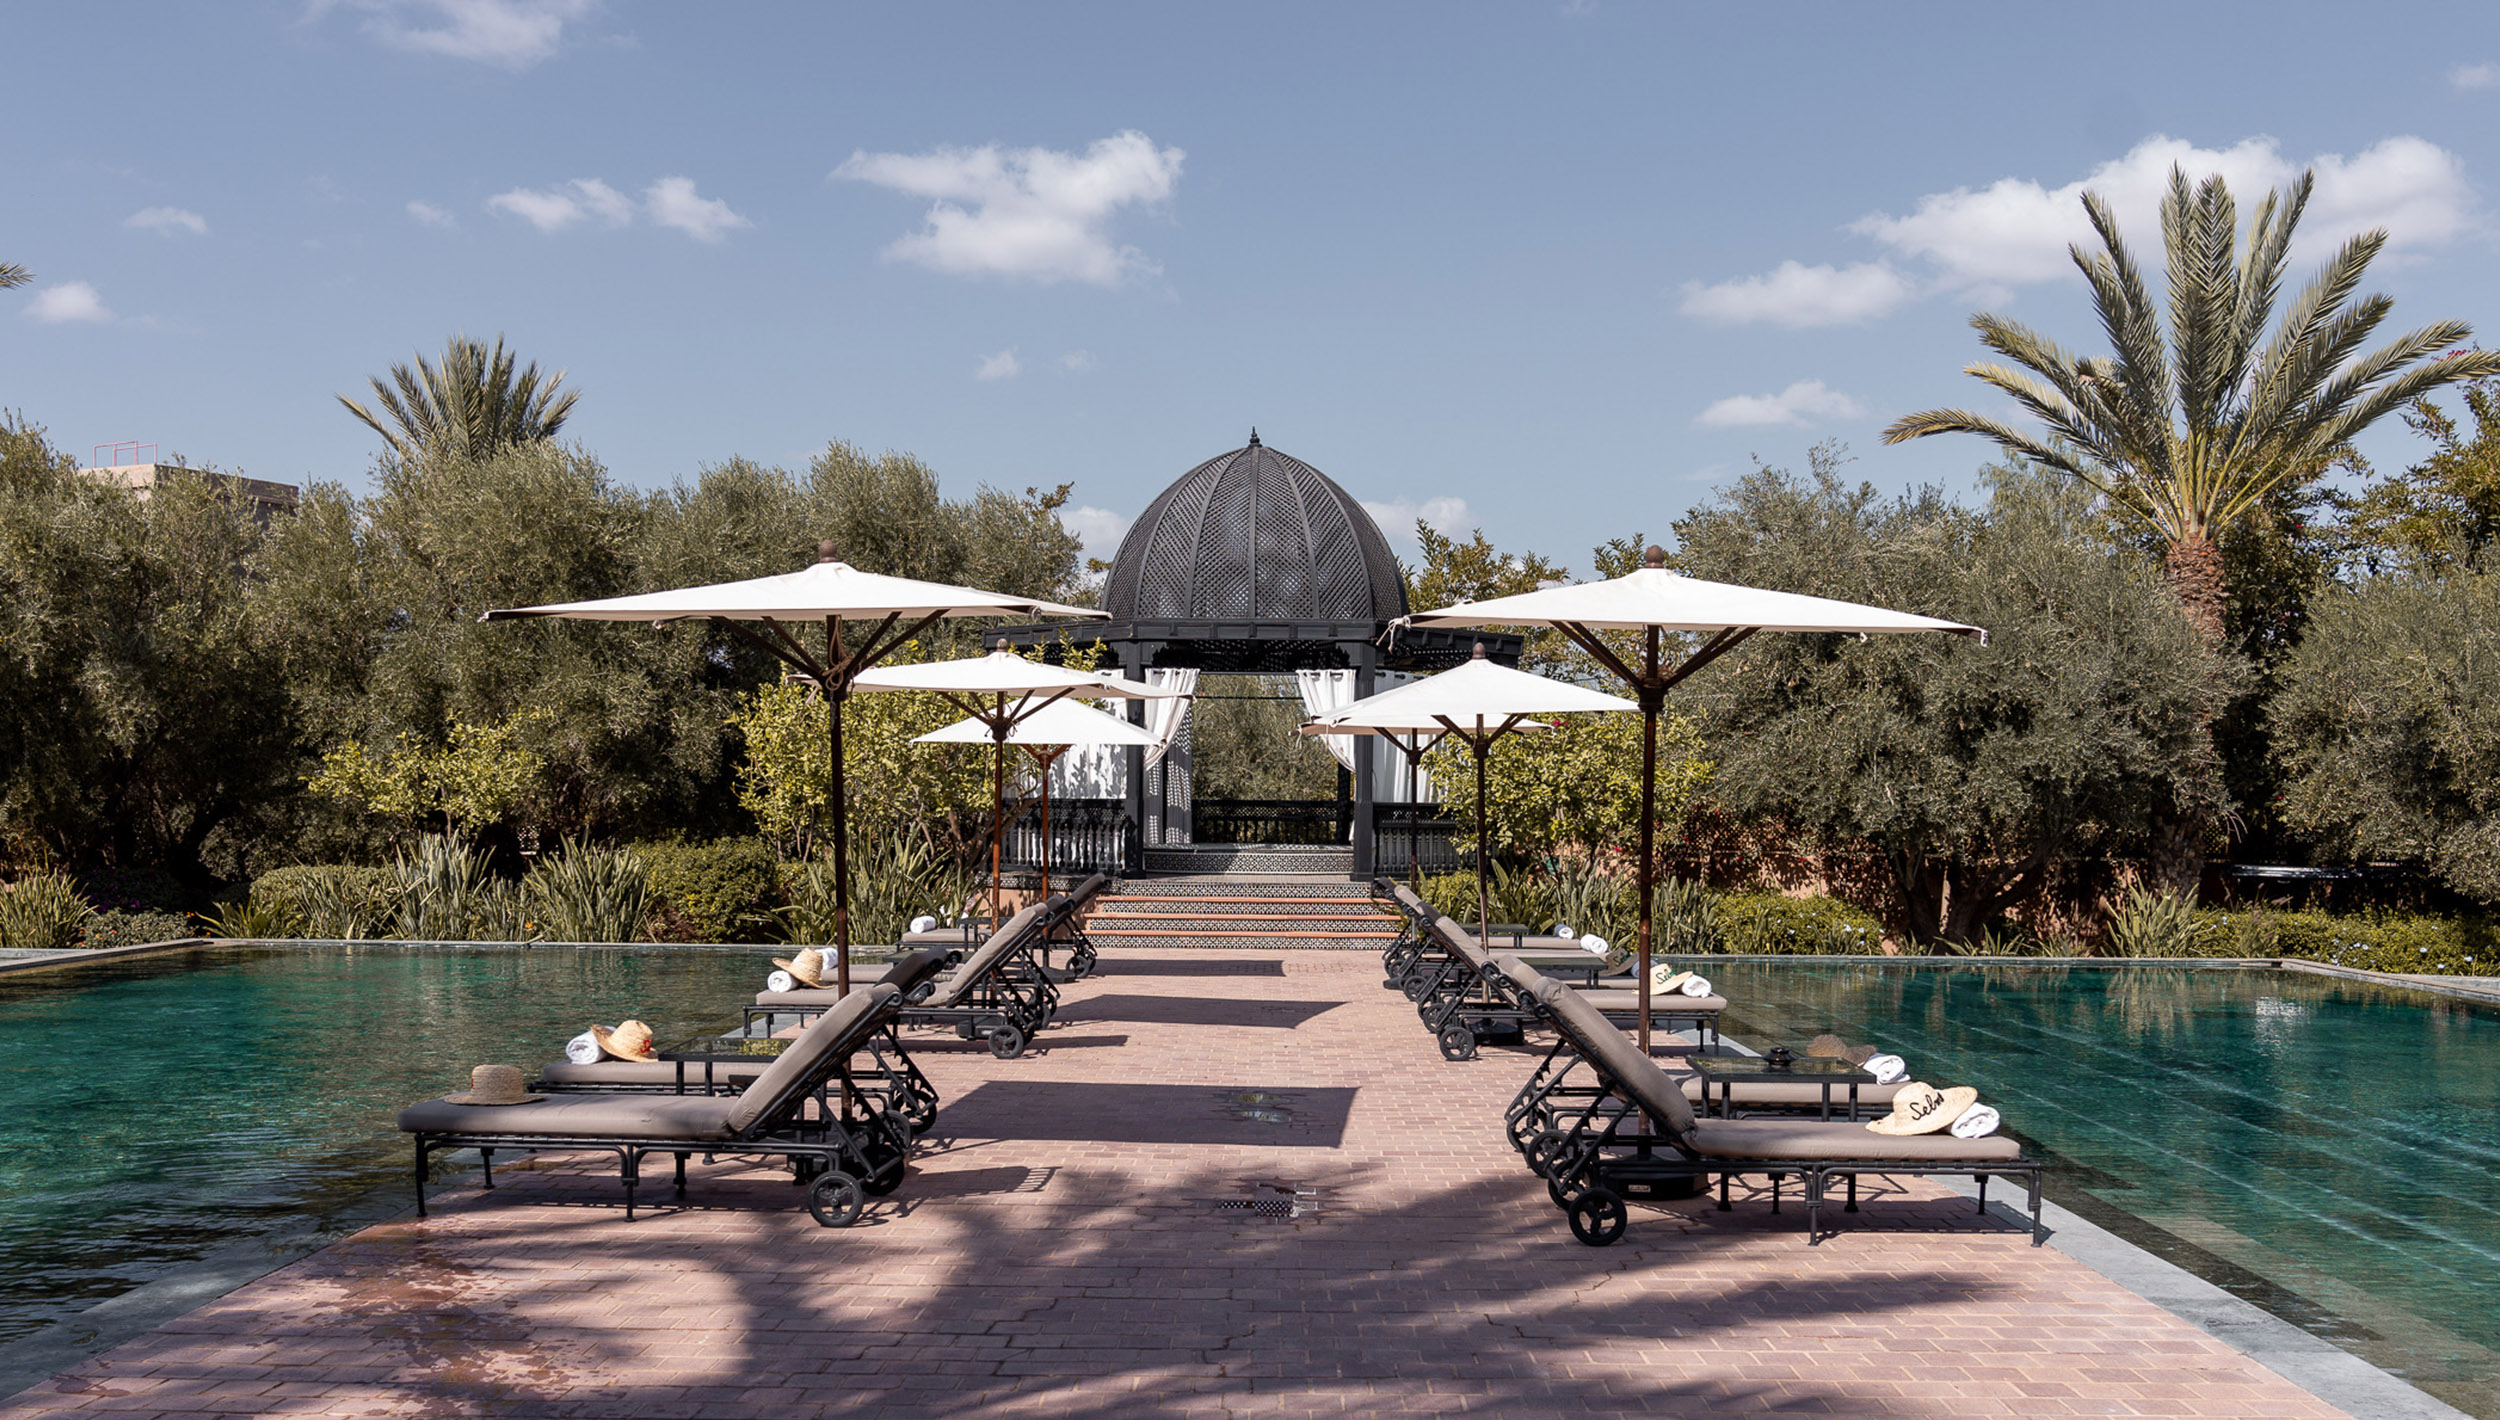 Chenot starts offering its services through Chenot Spa Marrakech